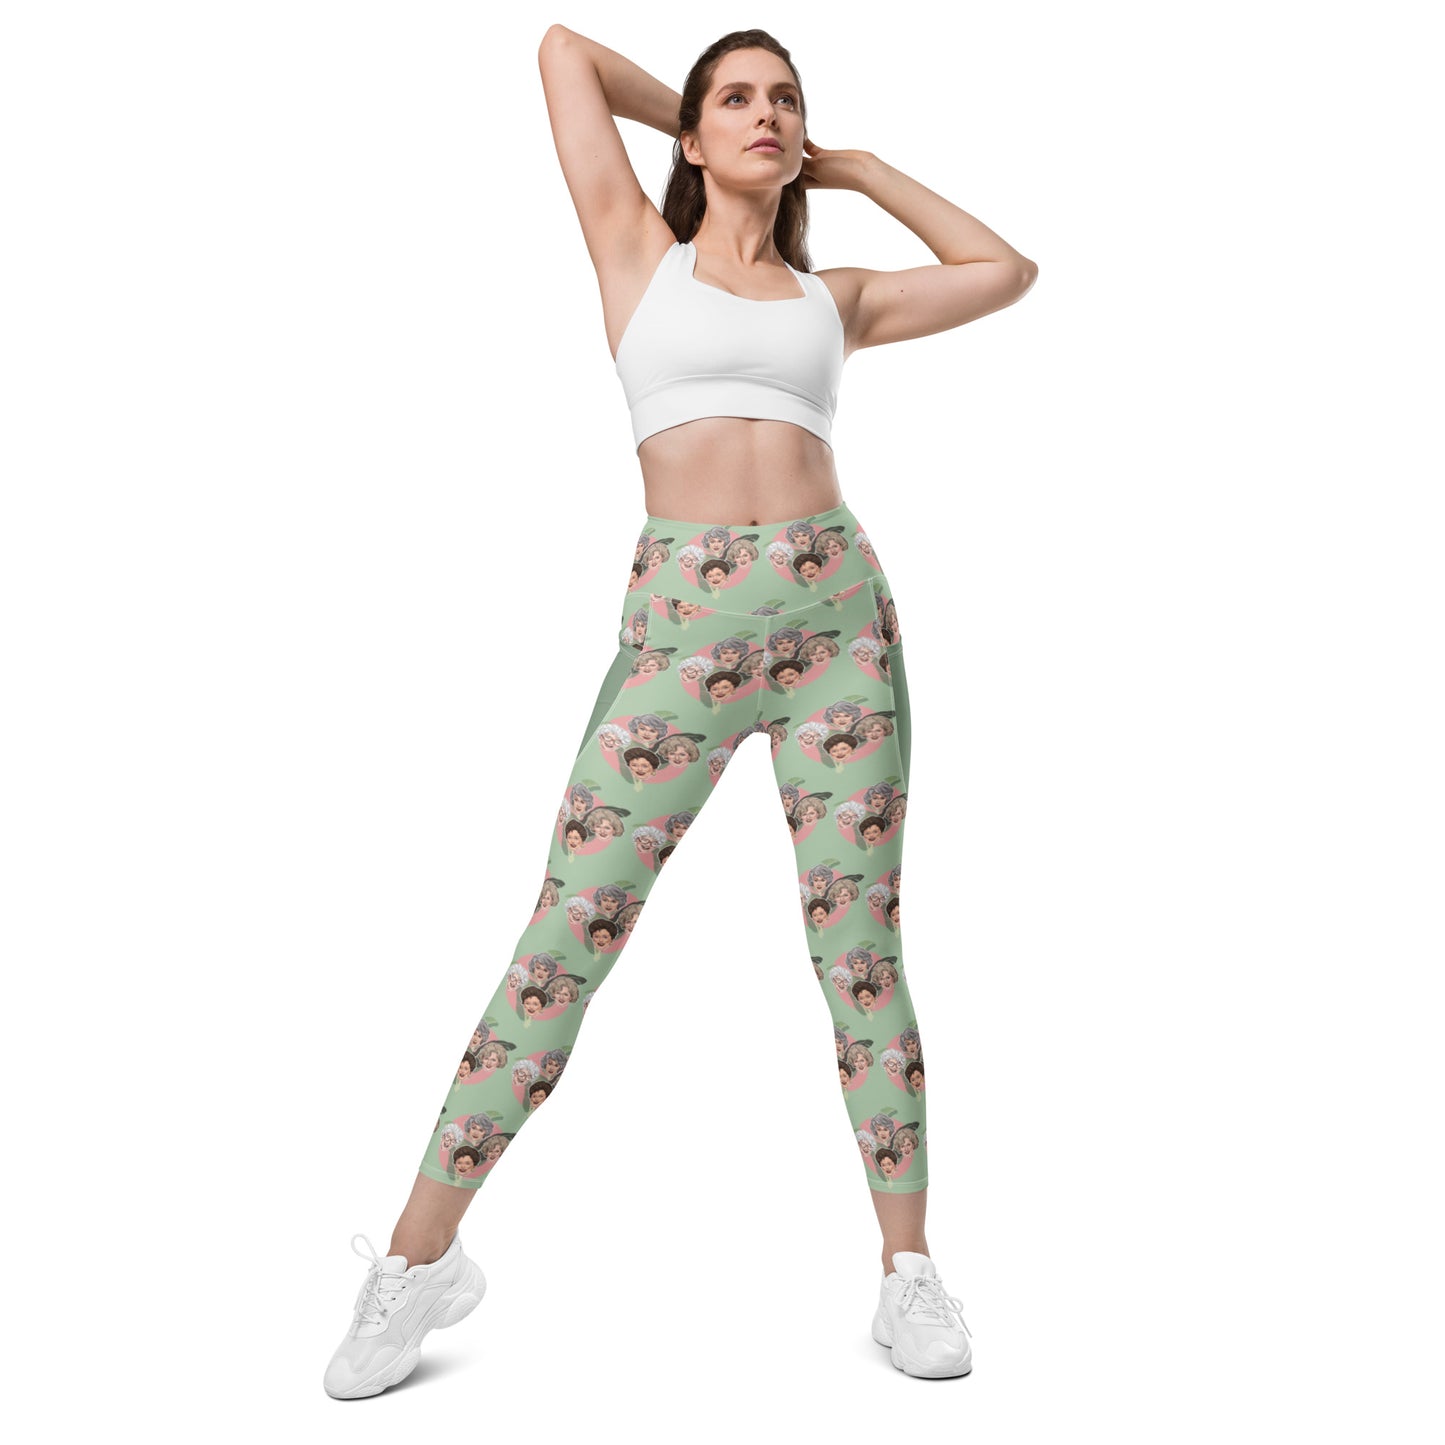 "The Lanai Lounger” Leggings with pockets